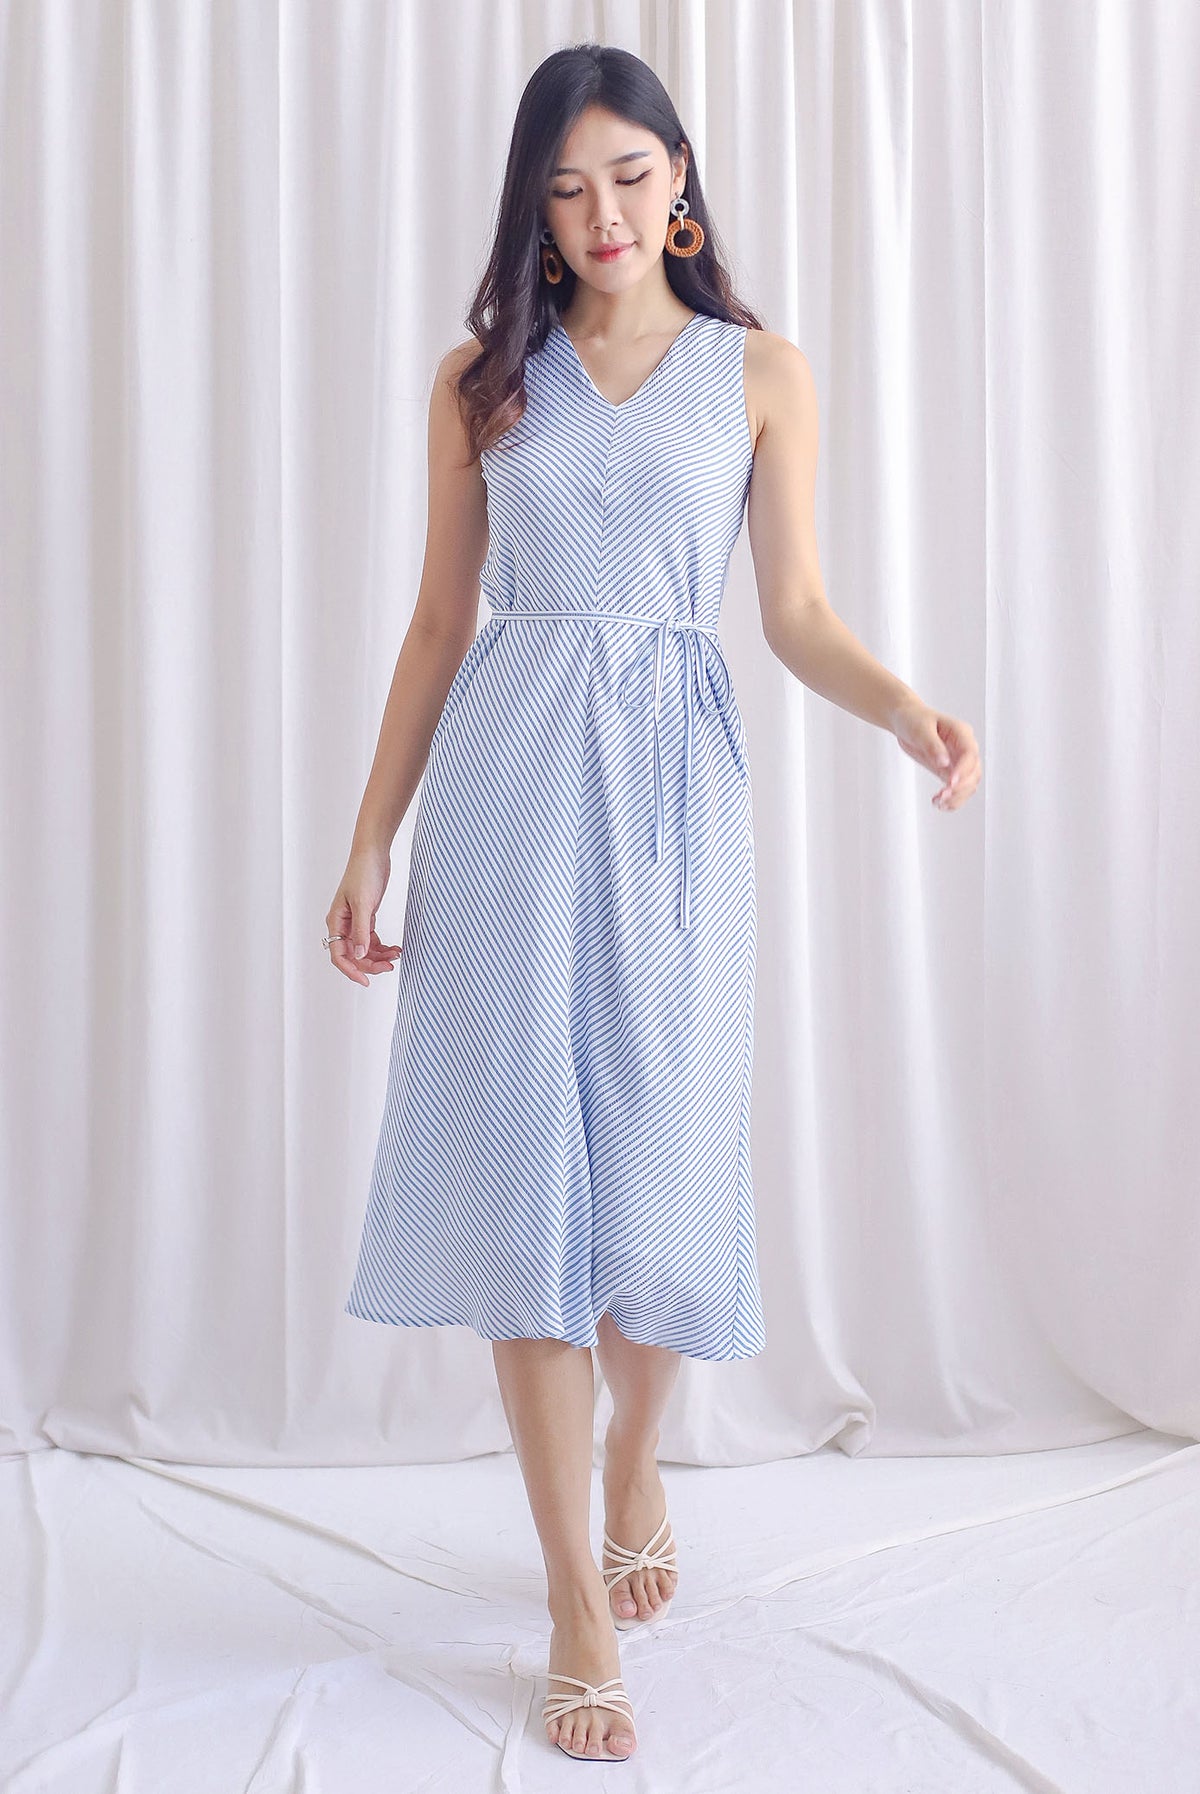 Panel flare dress (Trending style) with kiss pleat strap by Semasa